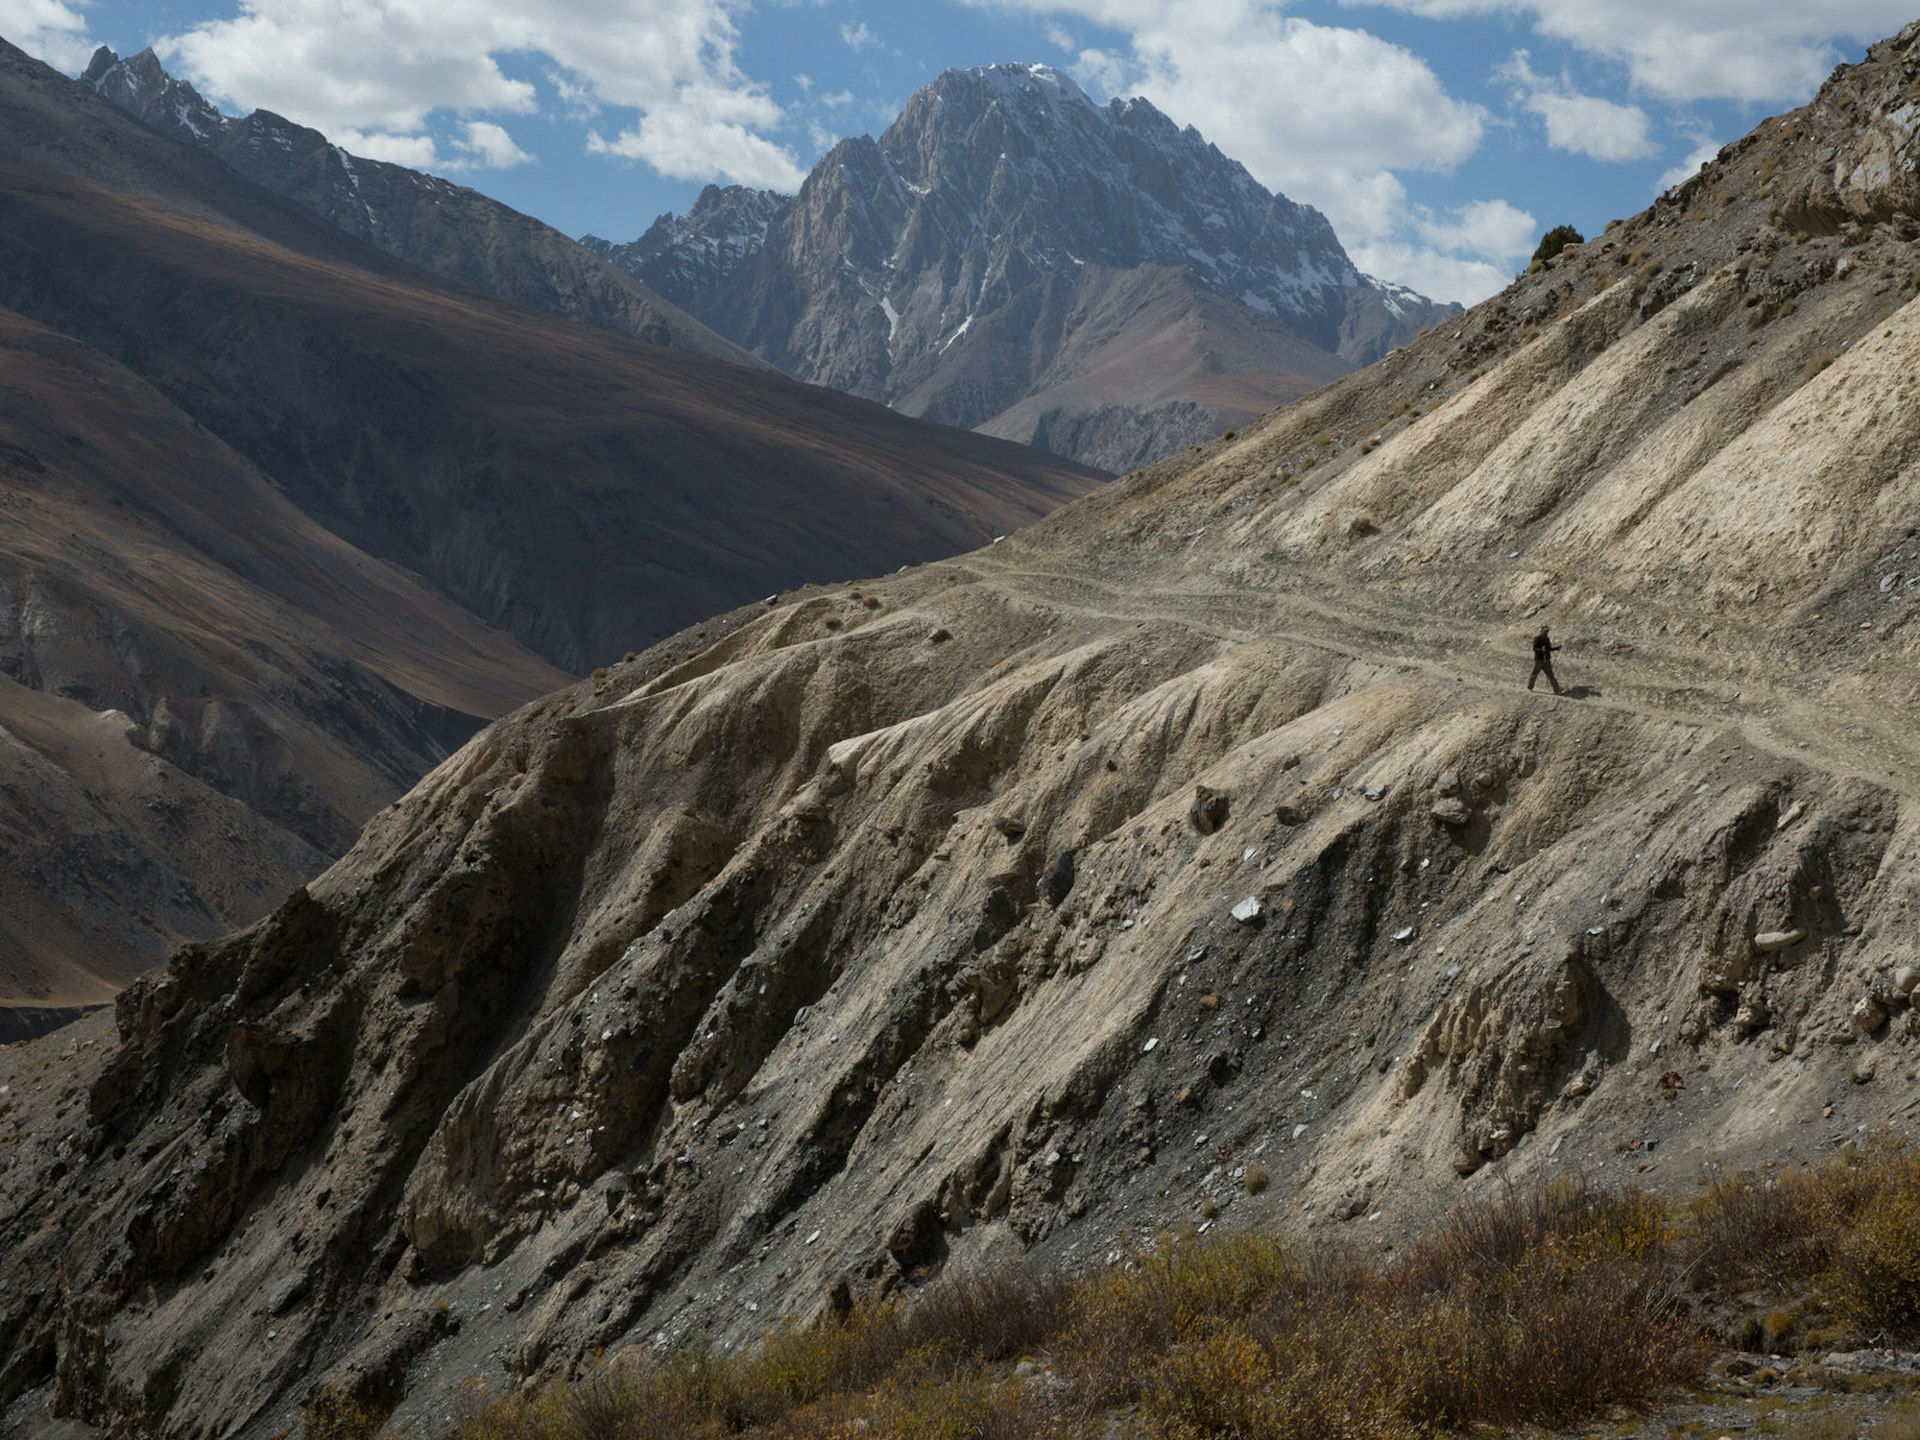 A lone walker treks along a steep mountainside path with tall peaks in the background